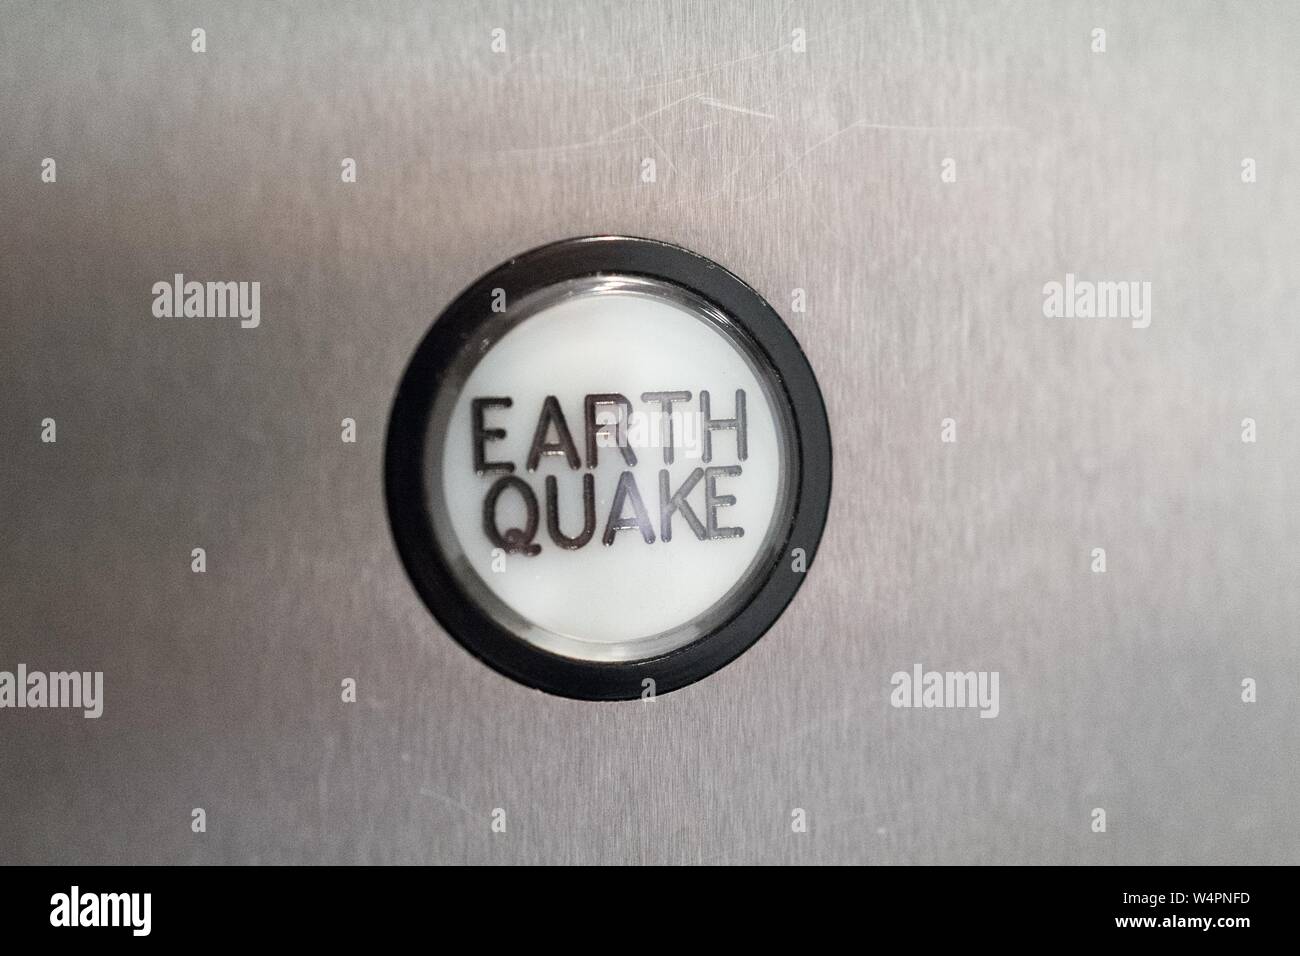 Close-up of earthquake warning button in interior of elevator in downtown Los Angeles, California, used to warn passengers in the event of an earthquake elevator shutdown, October 24, 2018. () Stock Photo